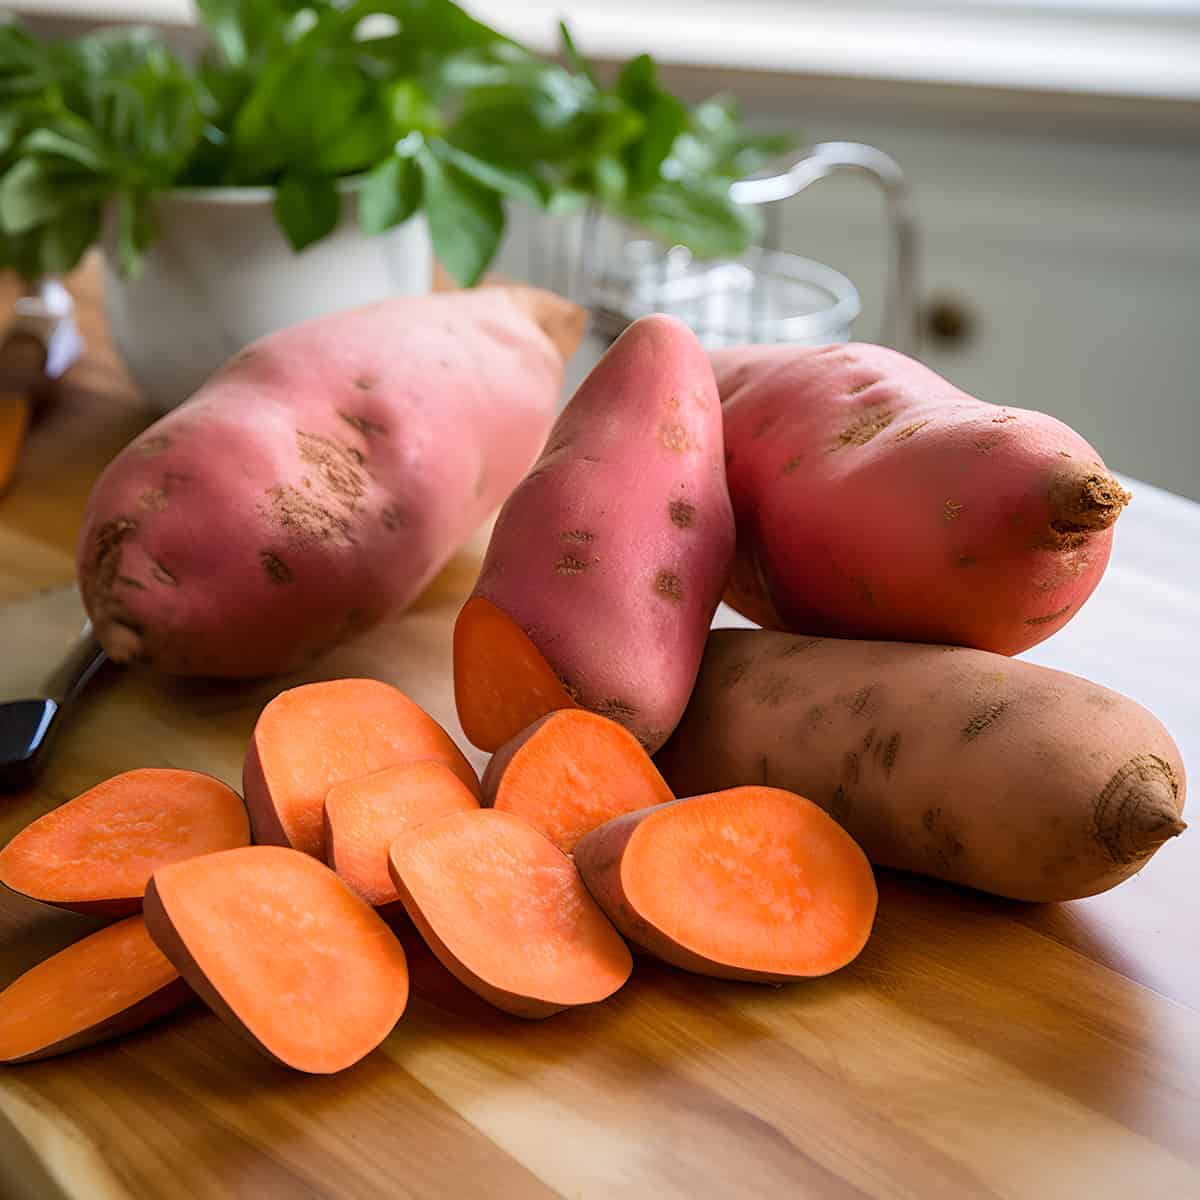 Red Jewel Sweet Potatoes on a kitchen counter